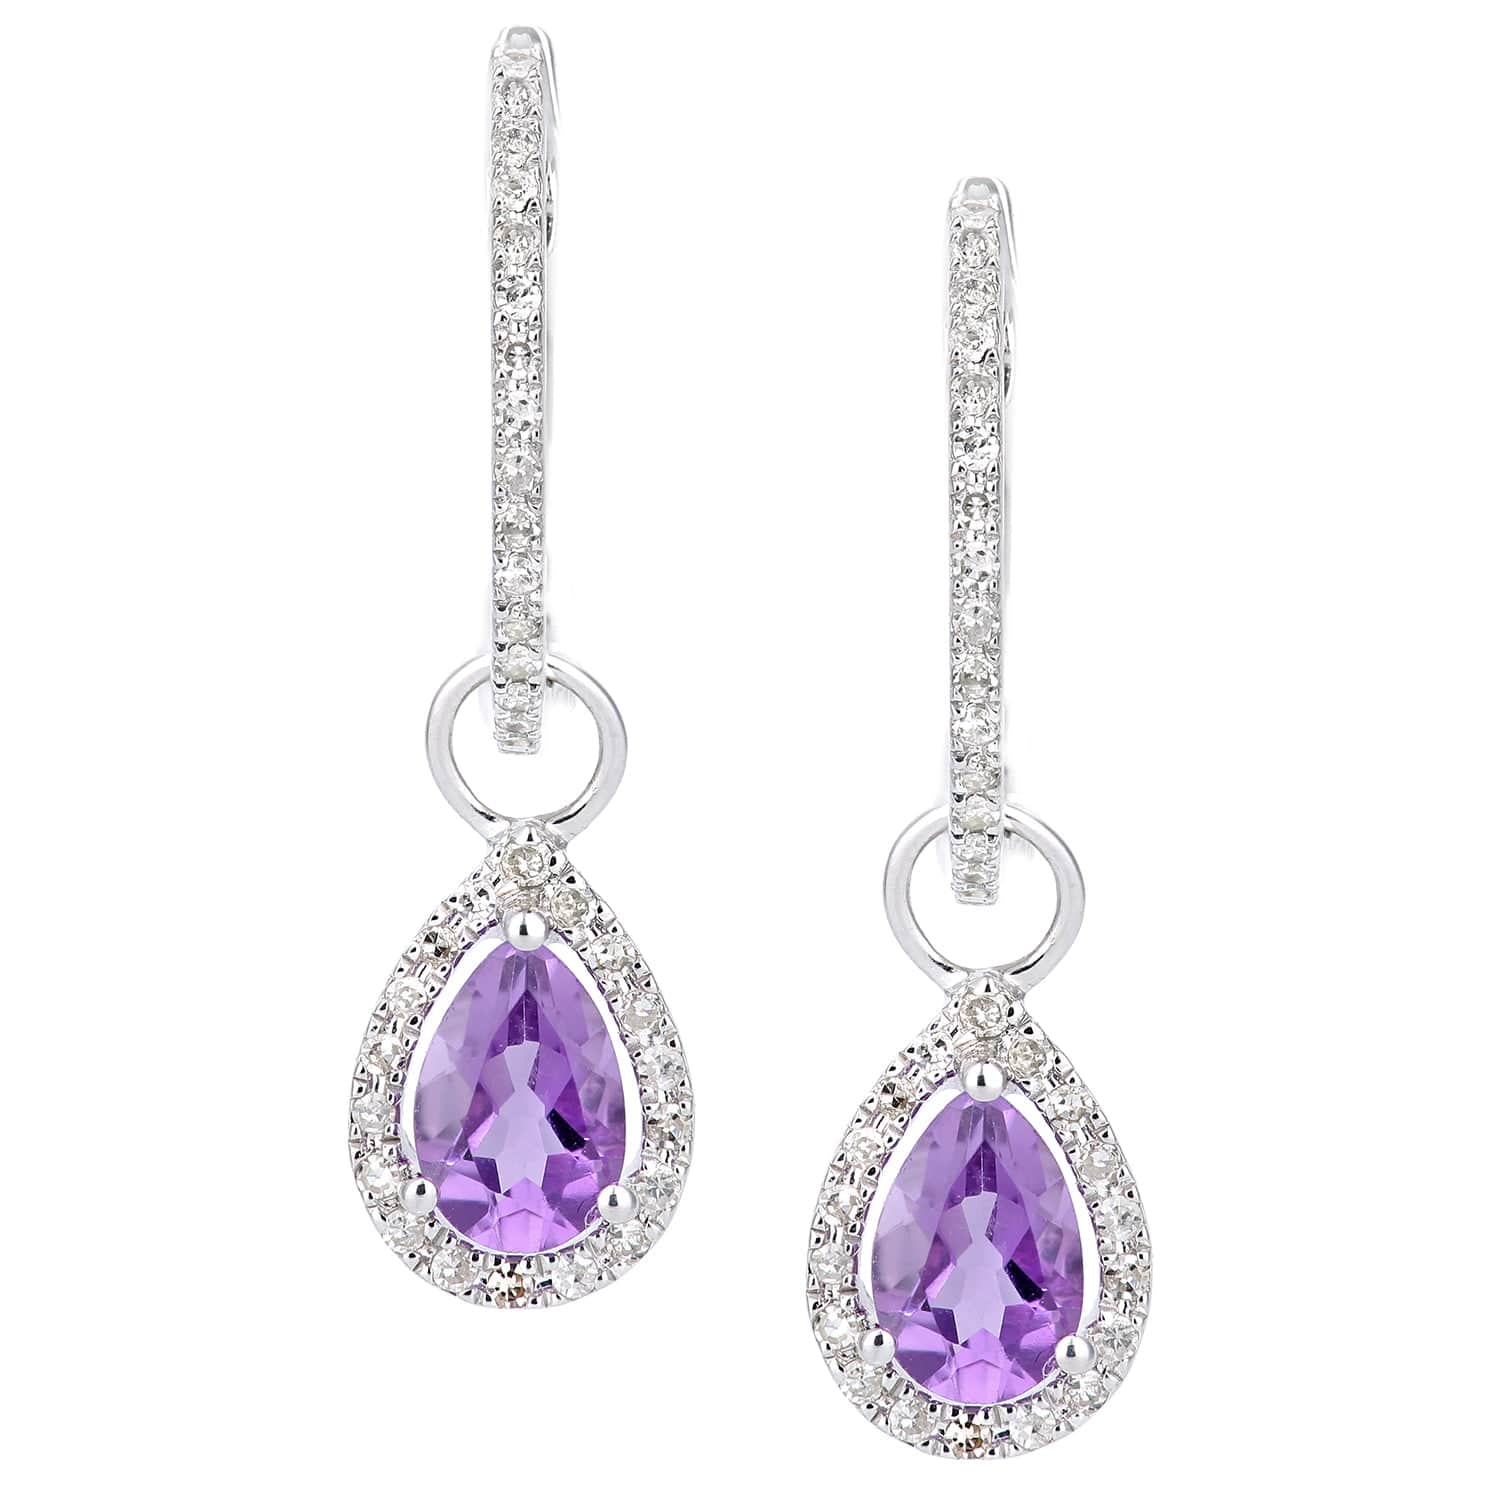 Lynora Luxe Earring White Gold 9ct / Amethyst 9ct White Gold Amethyst Teardrop Diamond Earrings